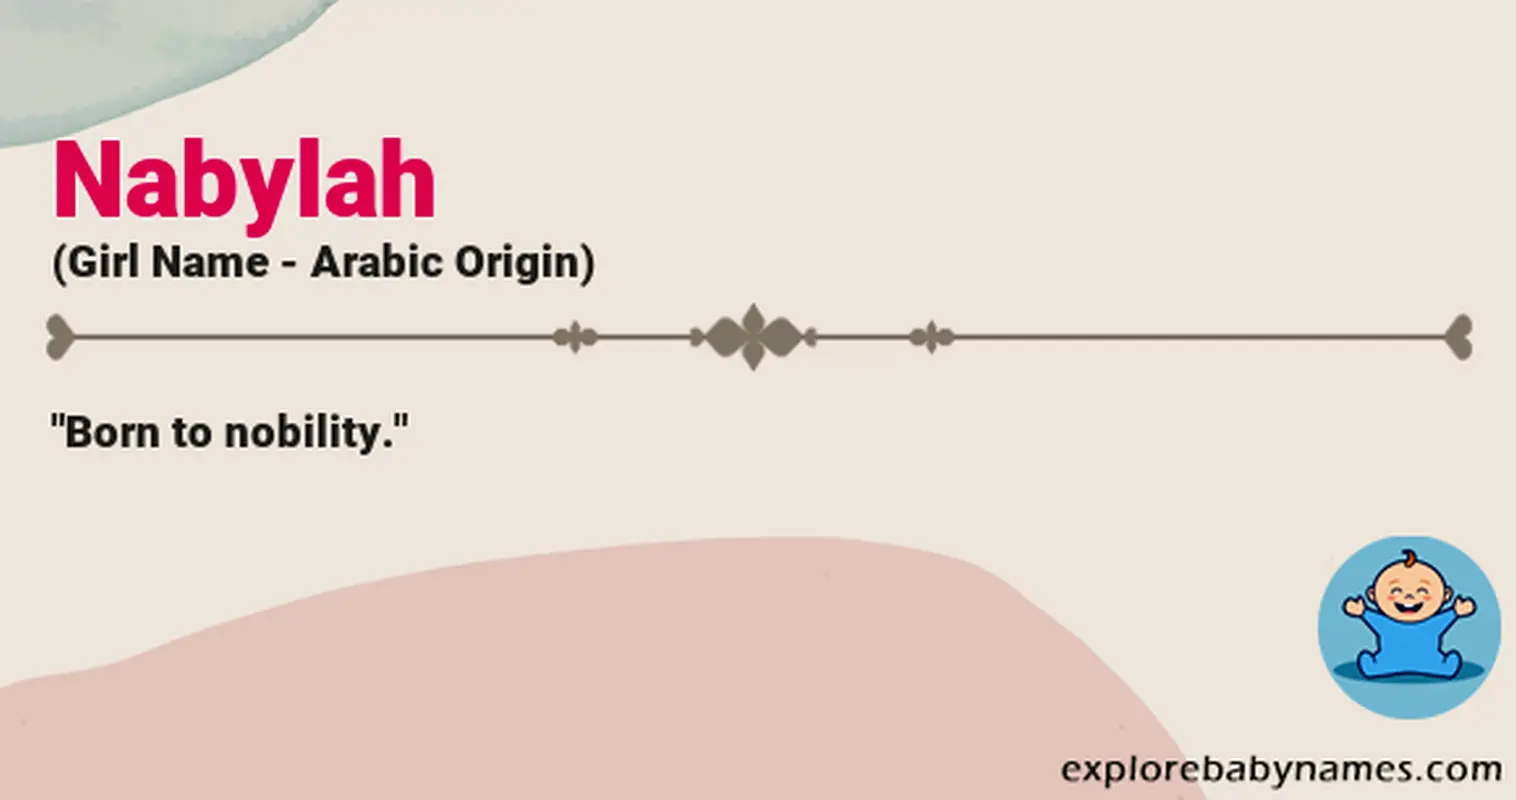 Meaning of Nabylah